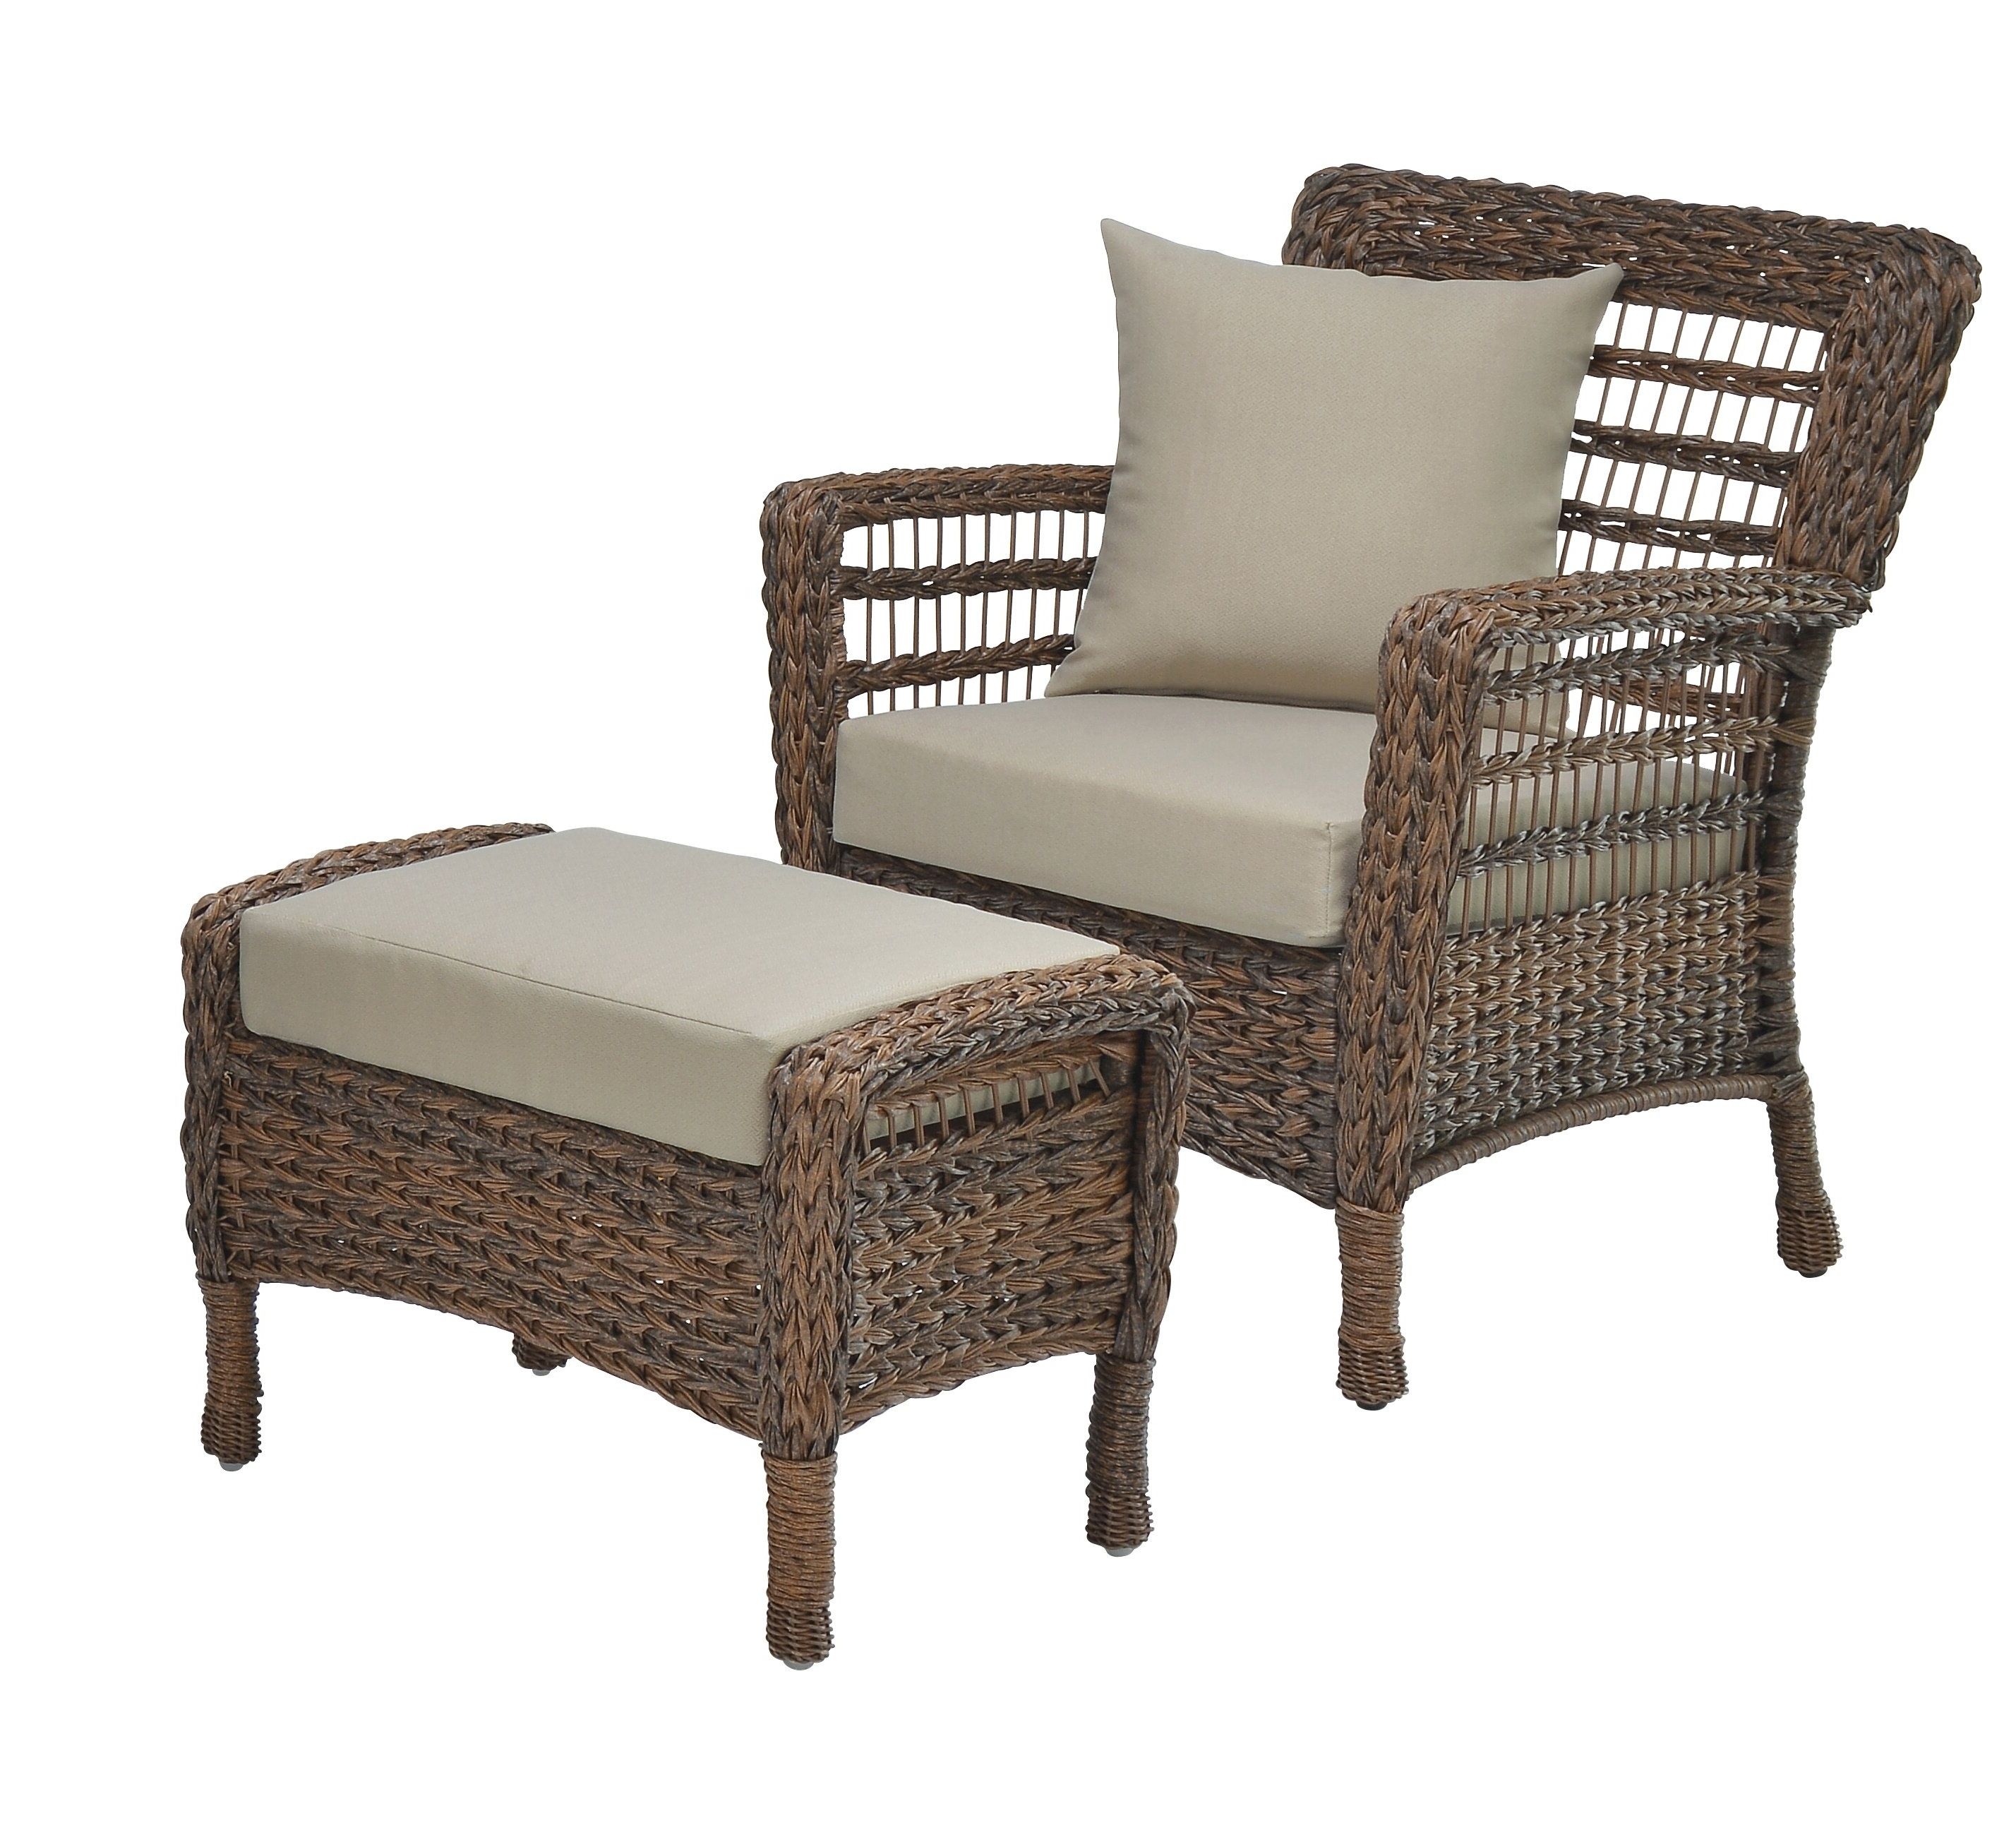 Outdoor Chairs With Ottoman – Visualhunt For Well Known Brown Wicker Chairs With Ottoman (View 15 of 15)